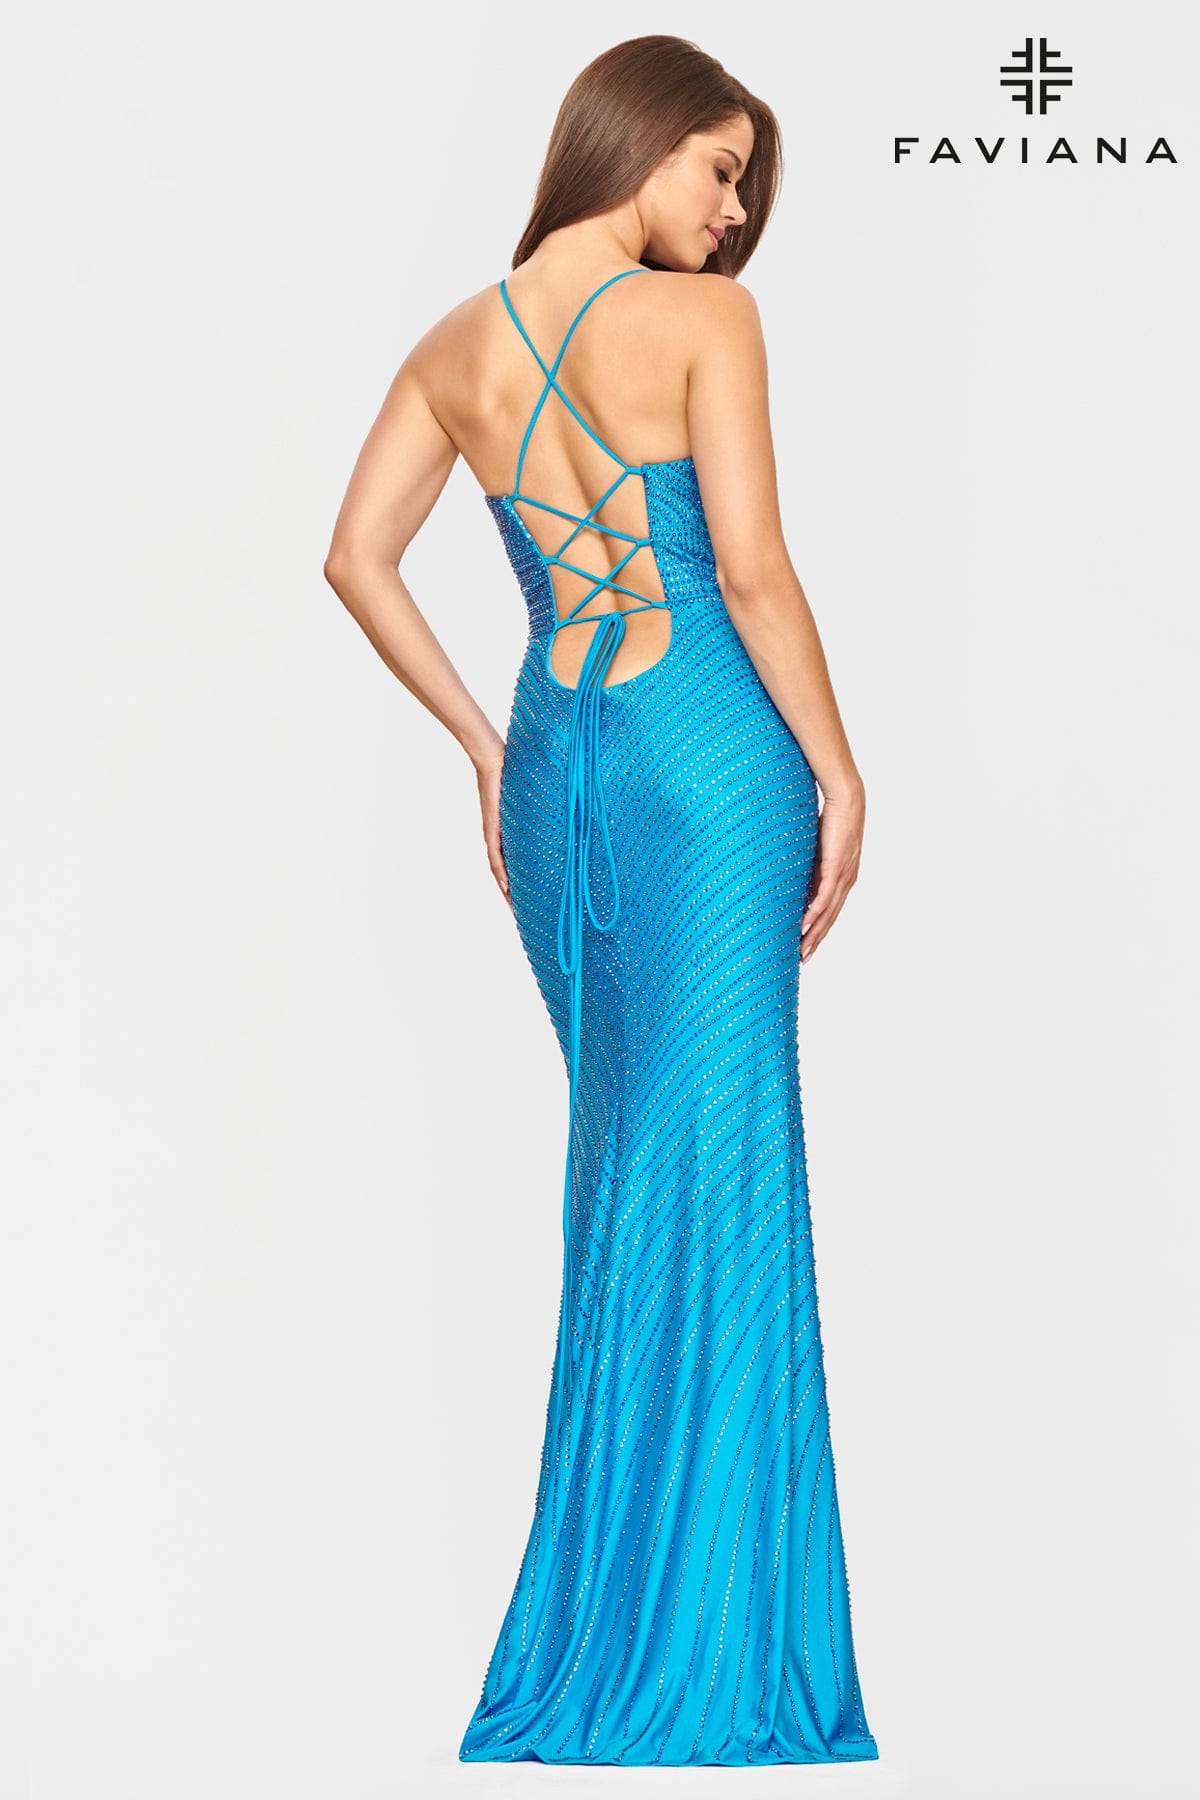 Long V Neck Prom Dress With Beading And Lace Up Back | S10802